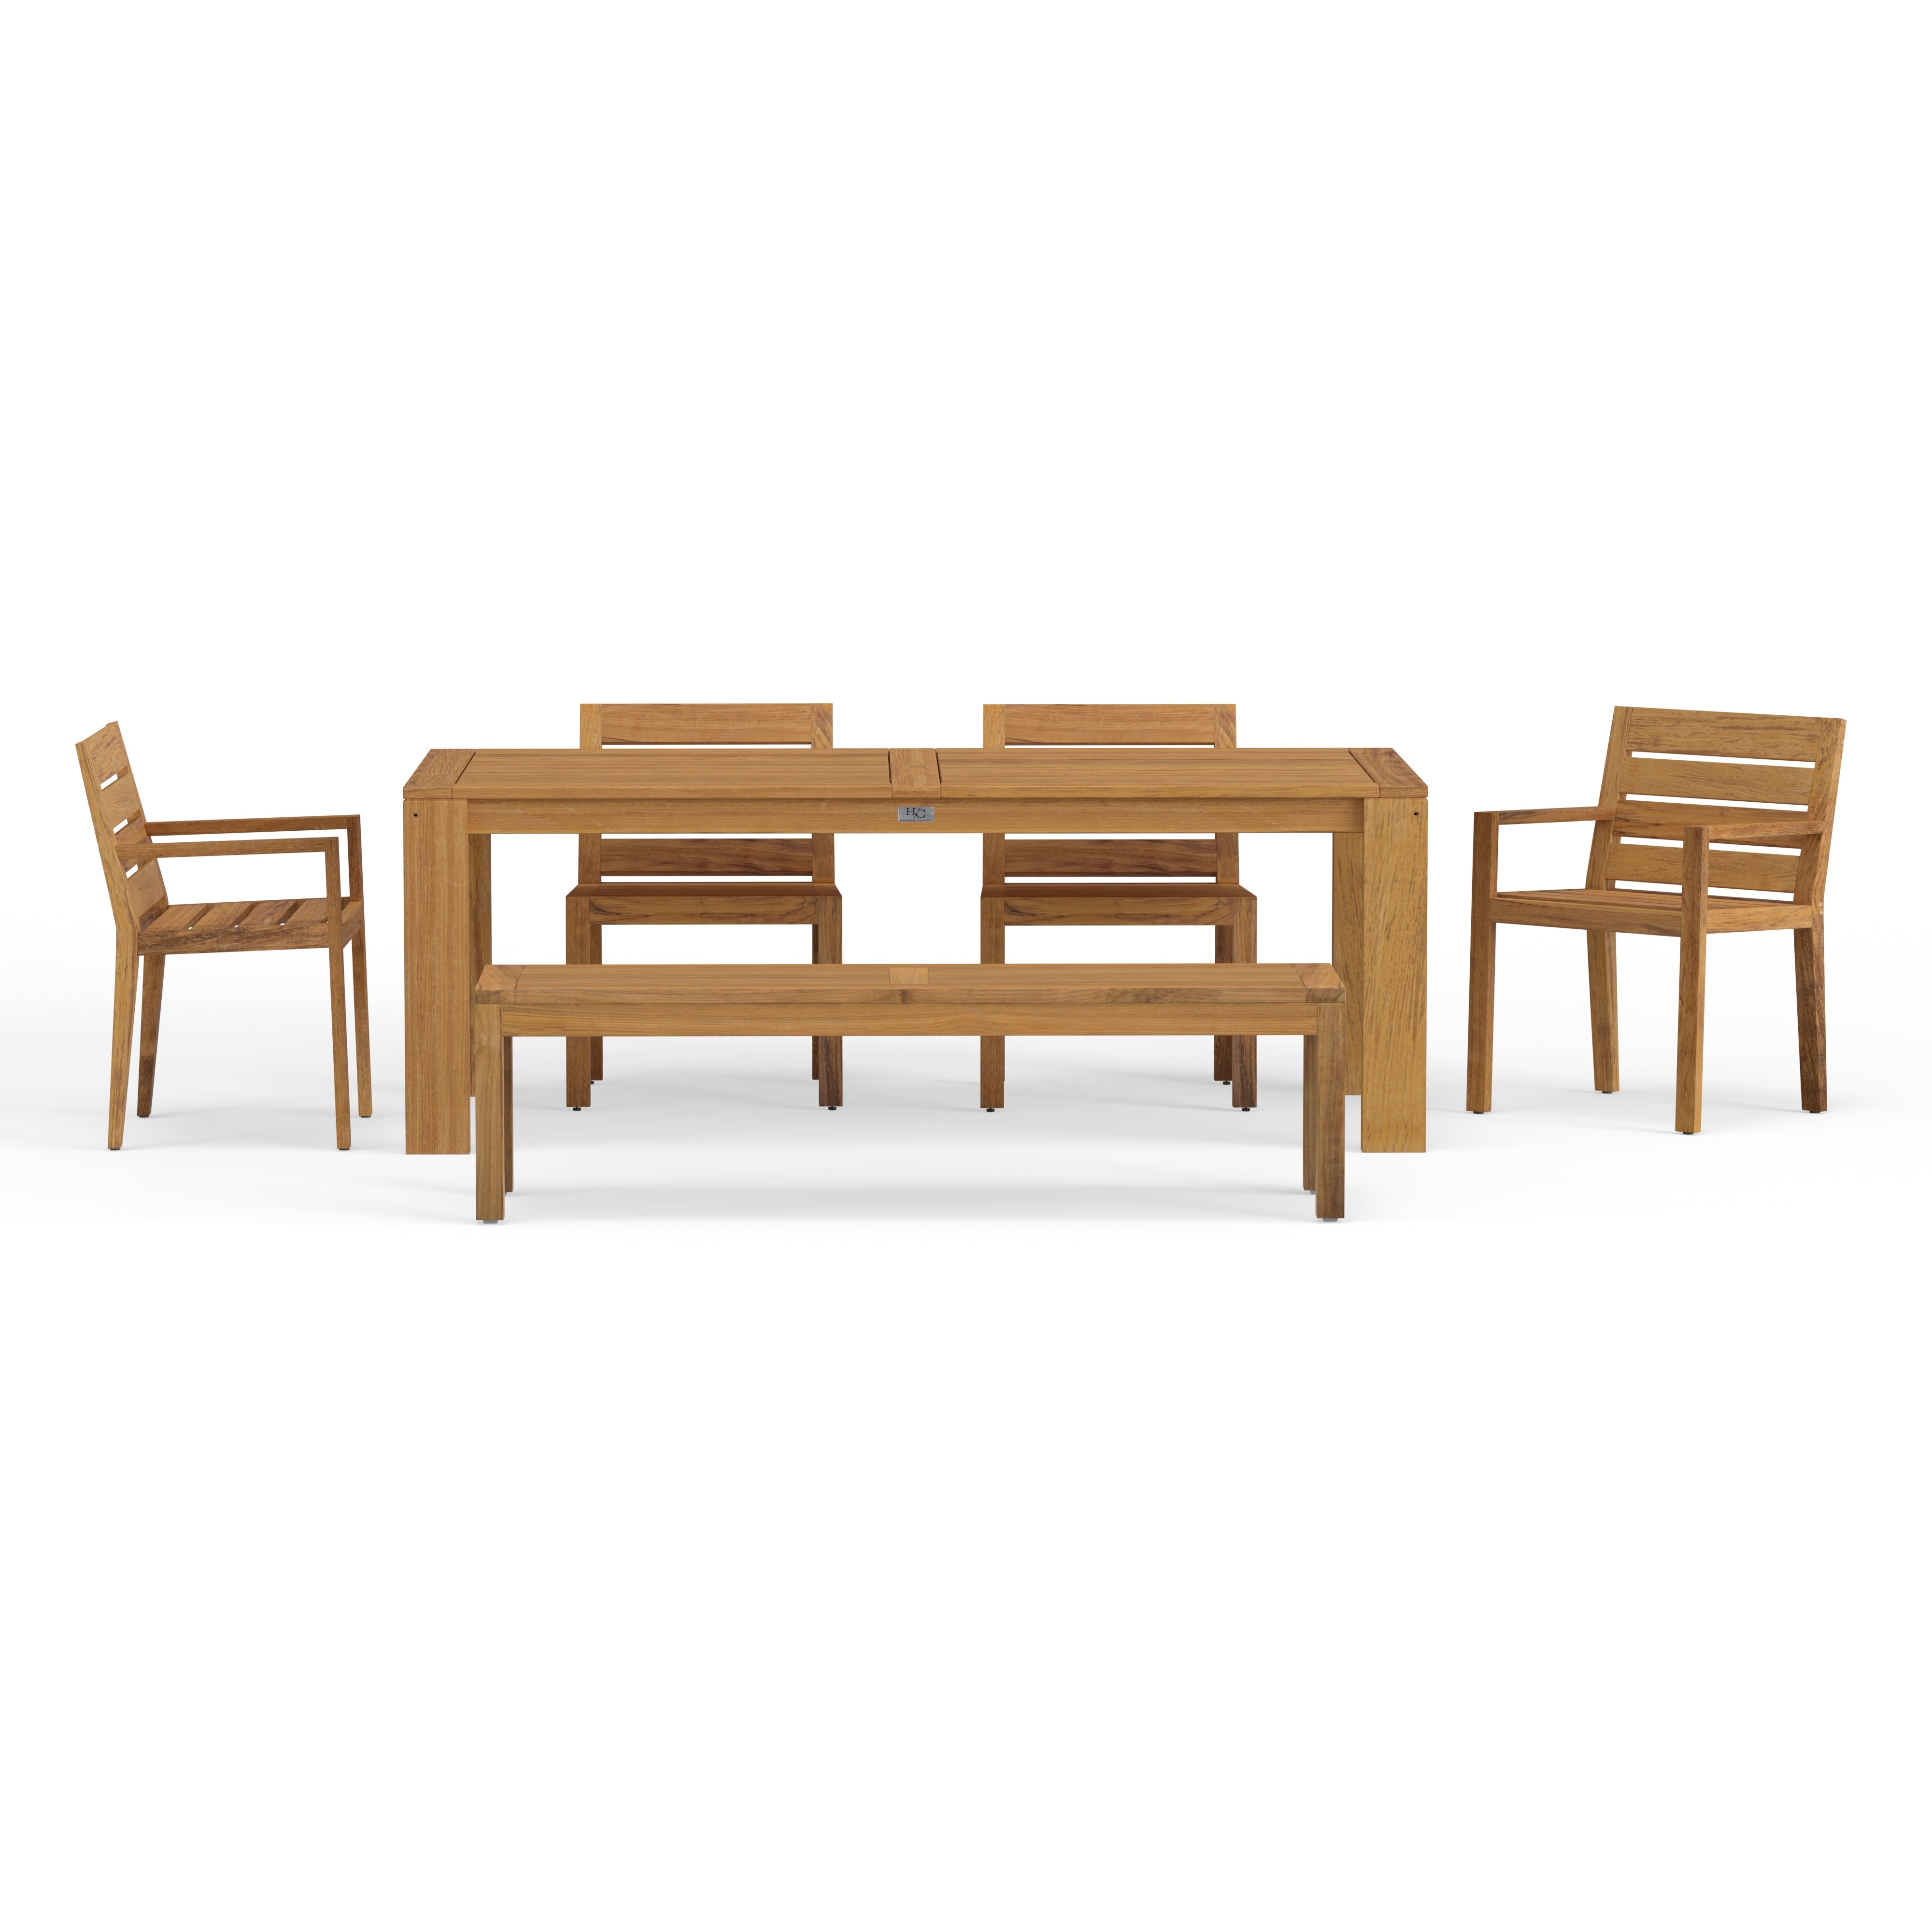 Highest Quality Teak Wood Dining Table And Chair Set With Bench